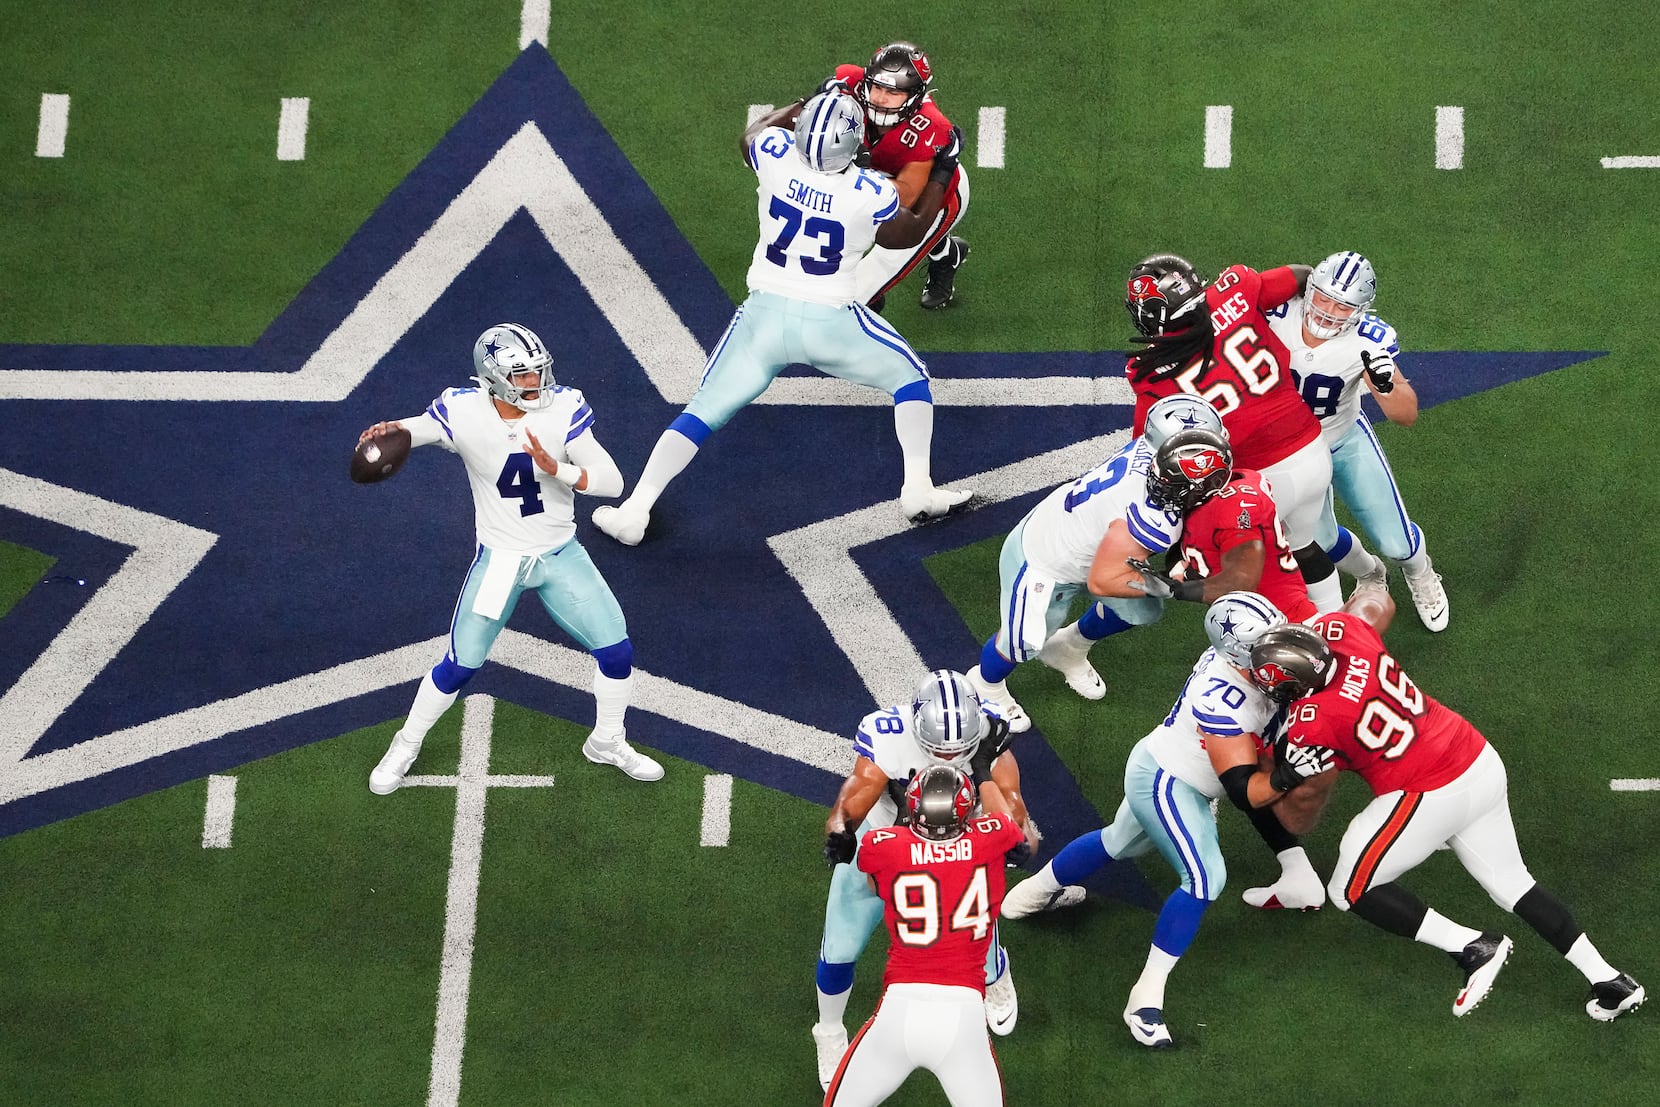 Dallas Cowboys playoff central: Schedules, storylines, latest news and more